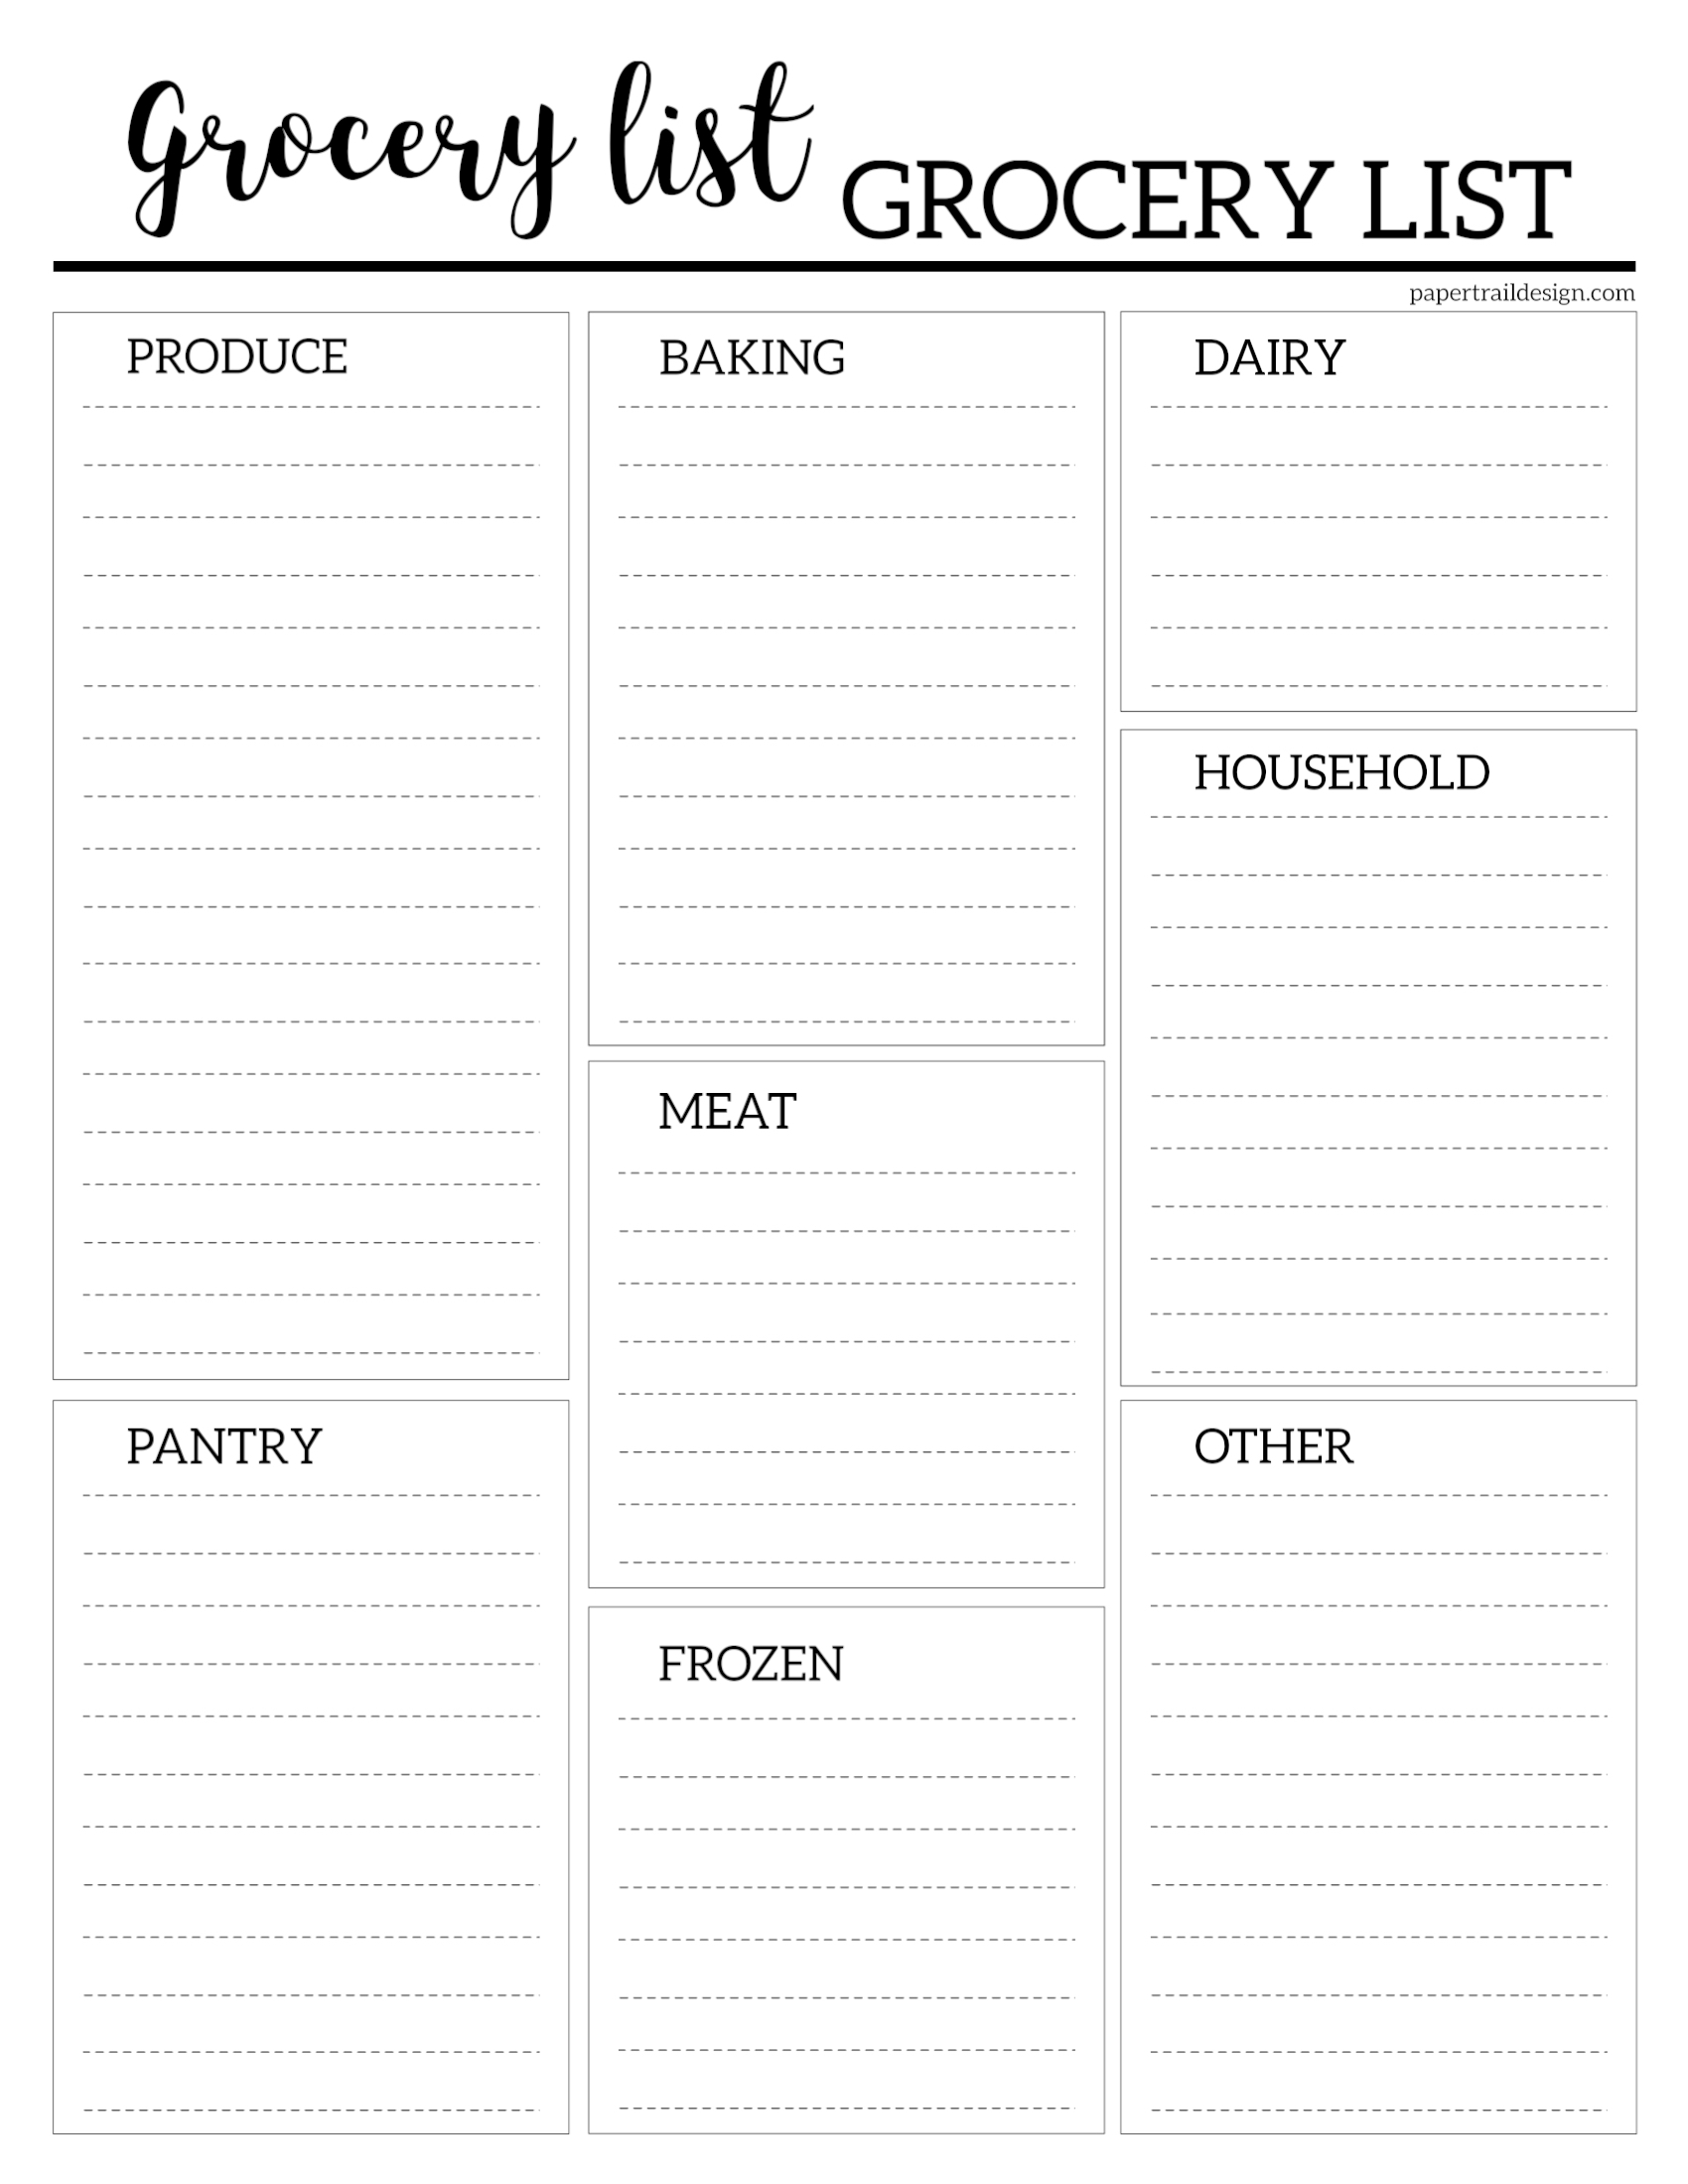 Free Grocery List Printable – Paper Trail Design Within Blank Grocery Shopping List Template